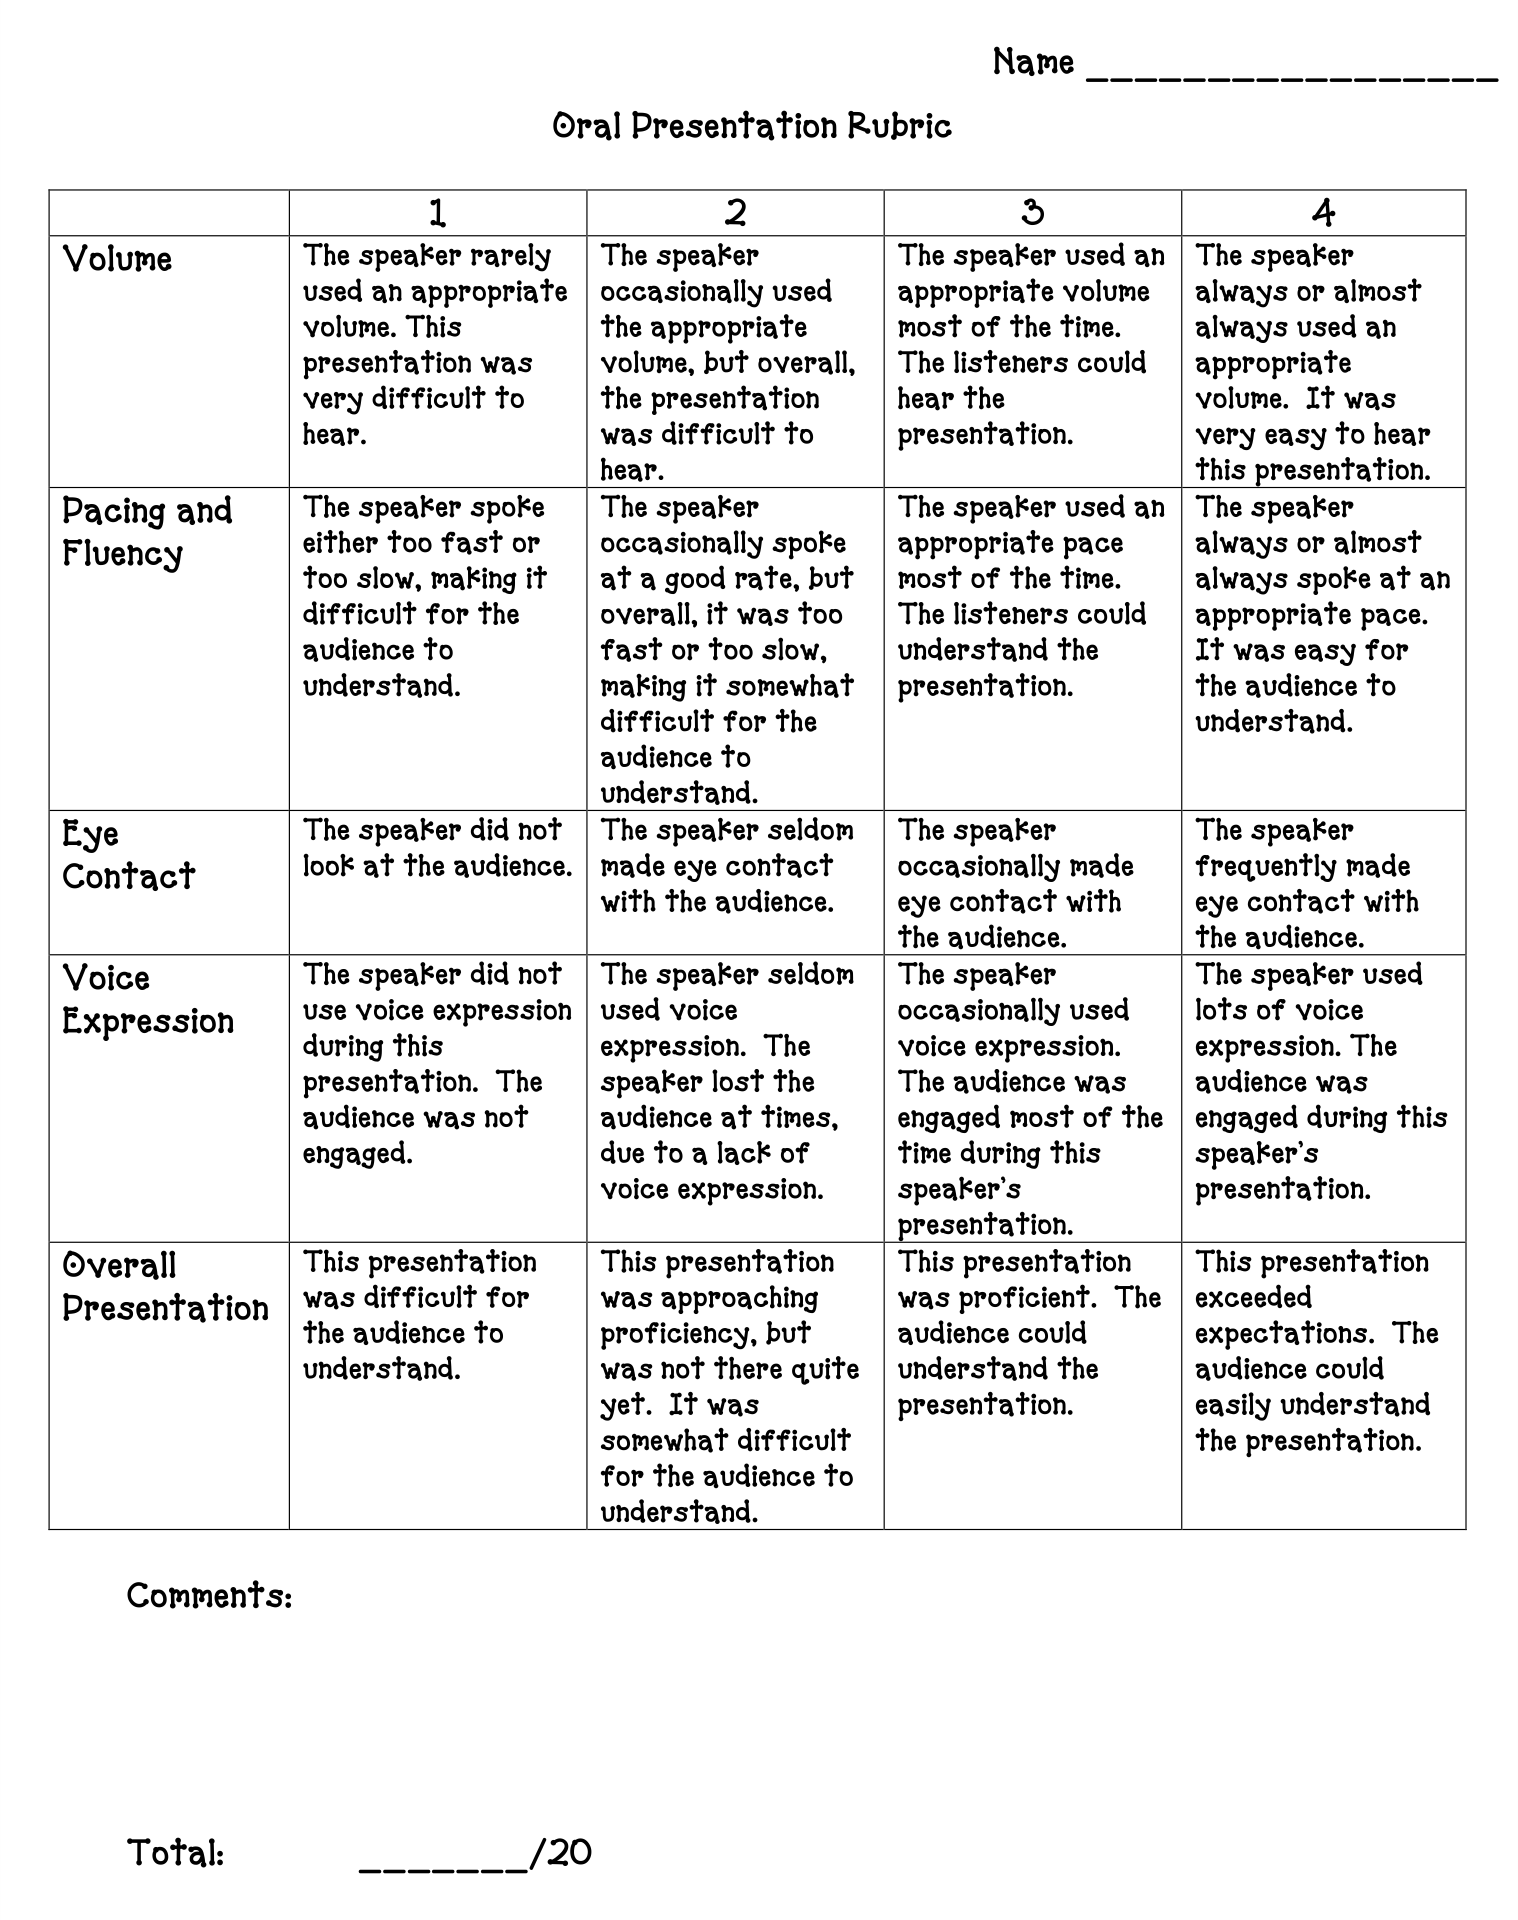 rubric for oral presentation project